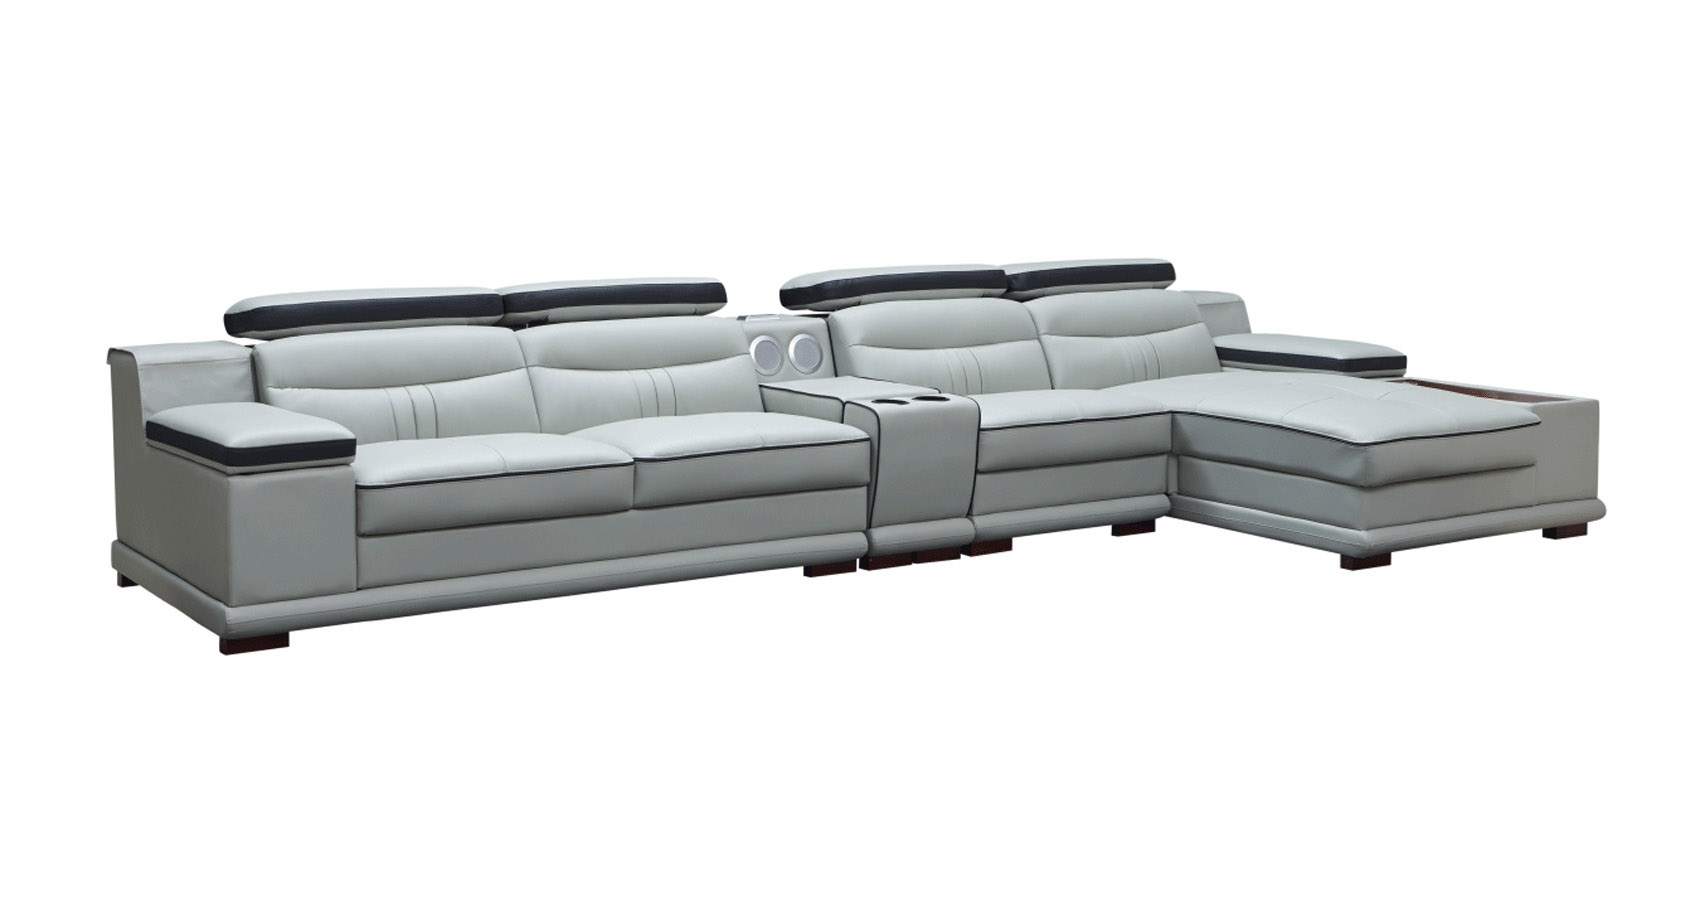 Unique Leather Two-Tone Grey and Chocolate Sectional Sofa